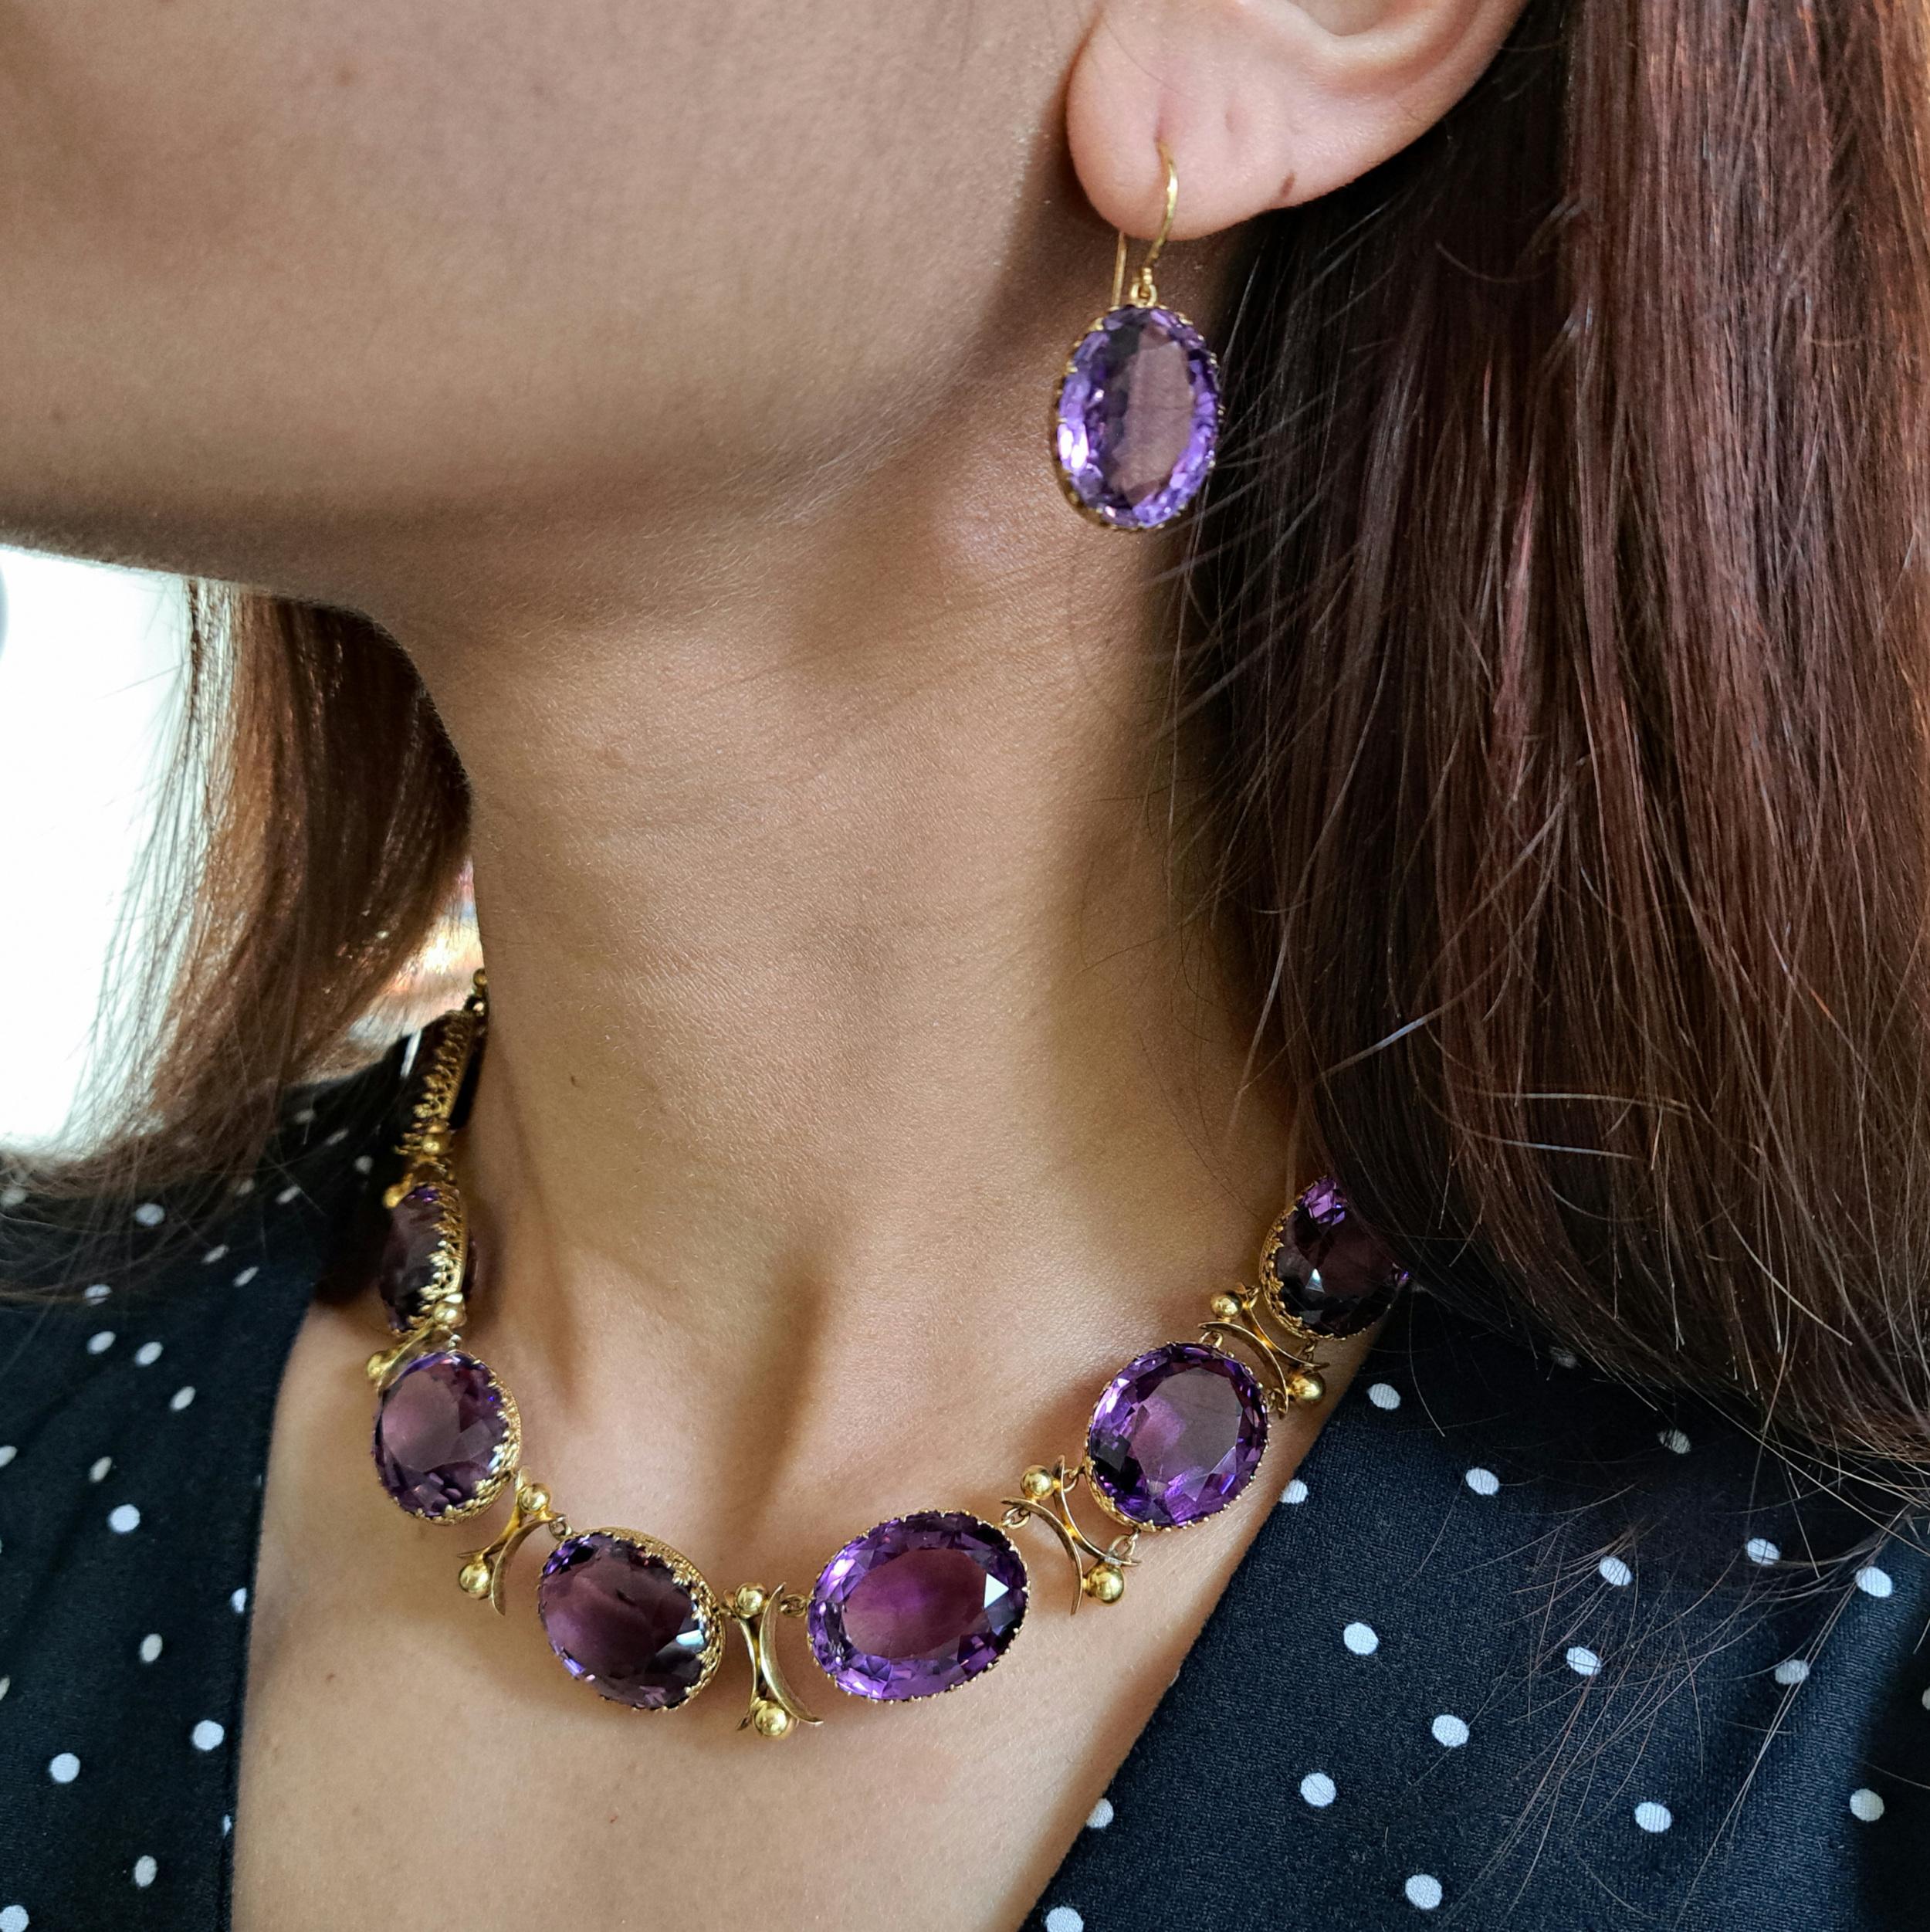 An antique amethyst and gold riviére necklace and earrings suite, with large, oval faceted, graduated amethysts, in open backed decorative, trefoil design, gallery strip bezel settings, with curved cross and ball links between the amethysts, with a